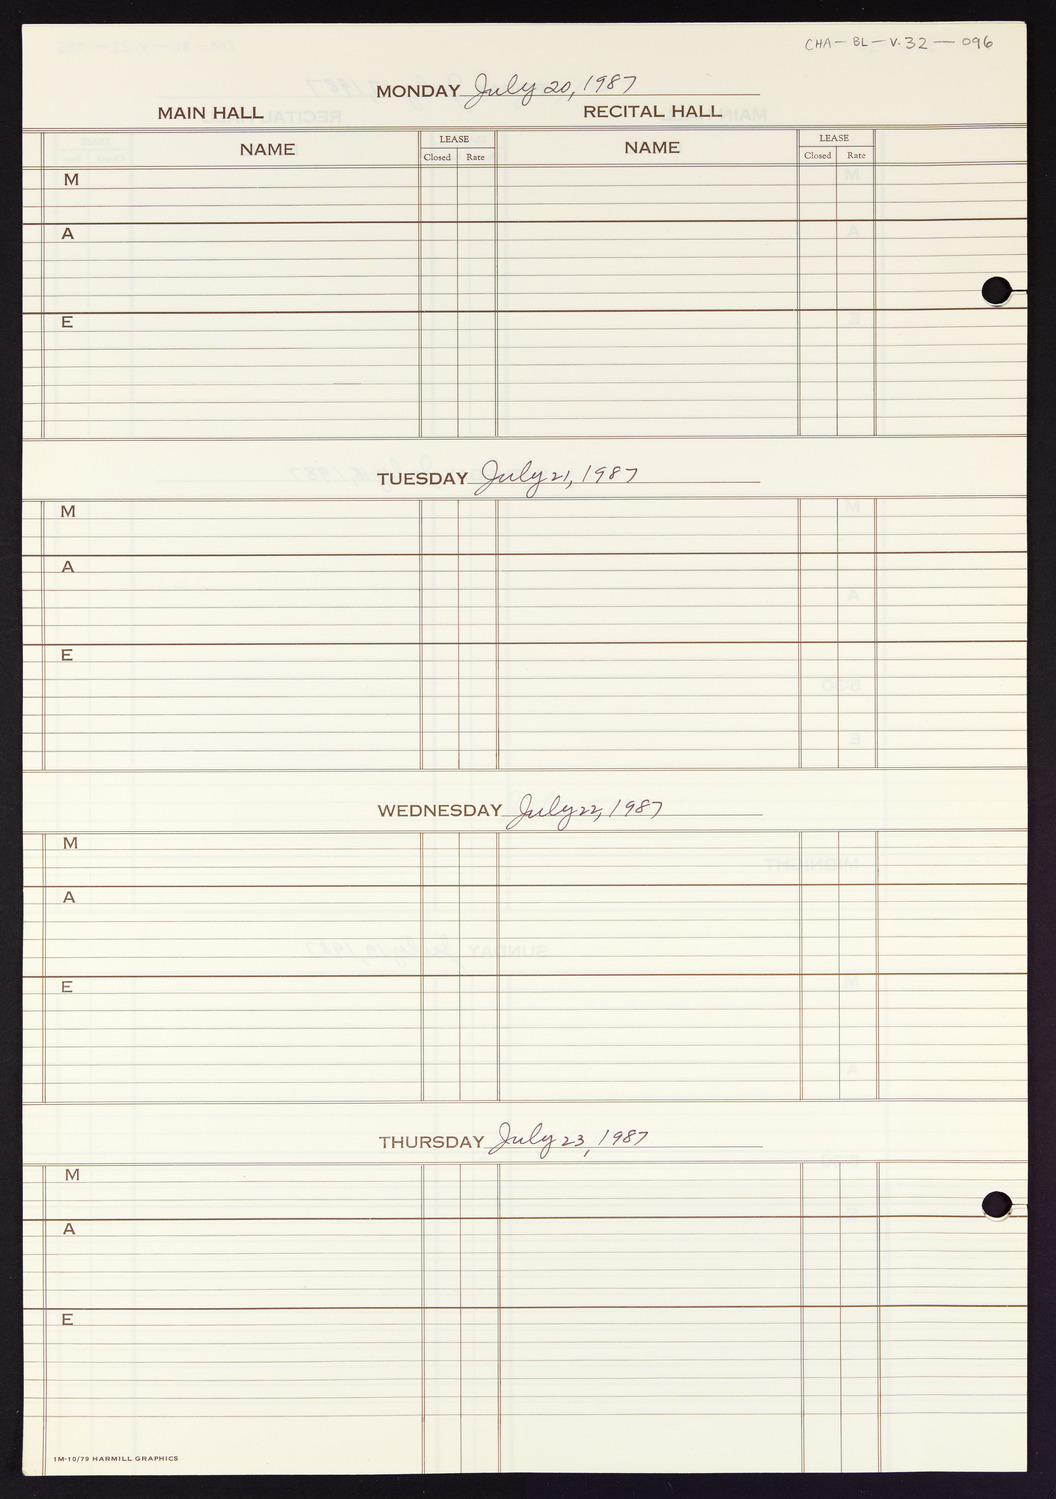 Carnegie Hall Booking Ledger, volume 32, page 96